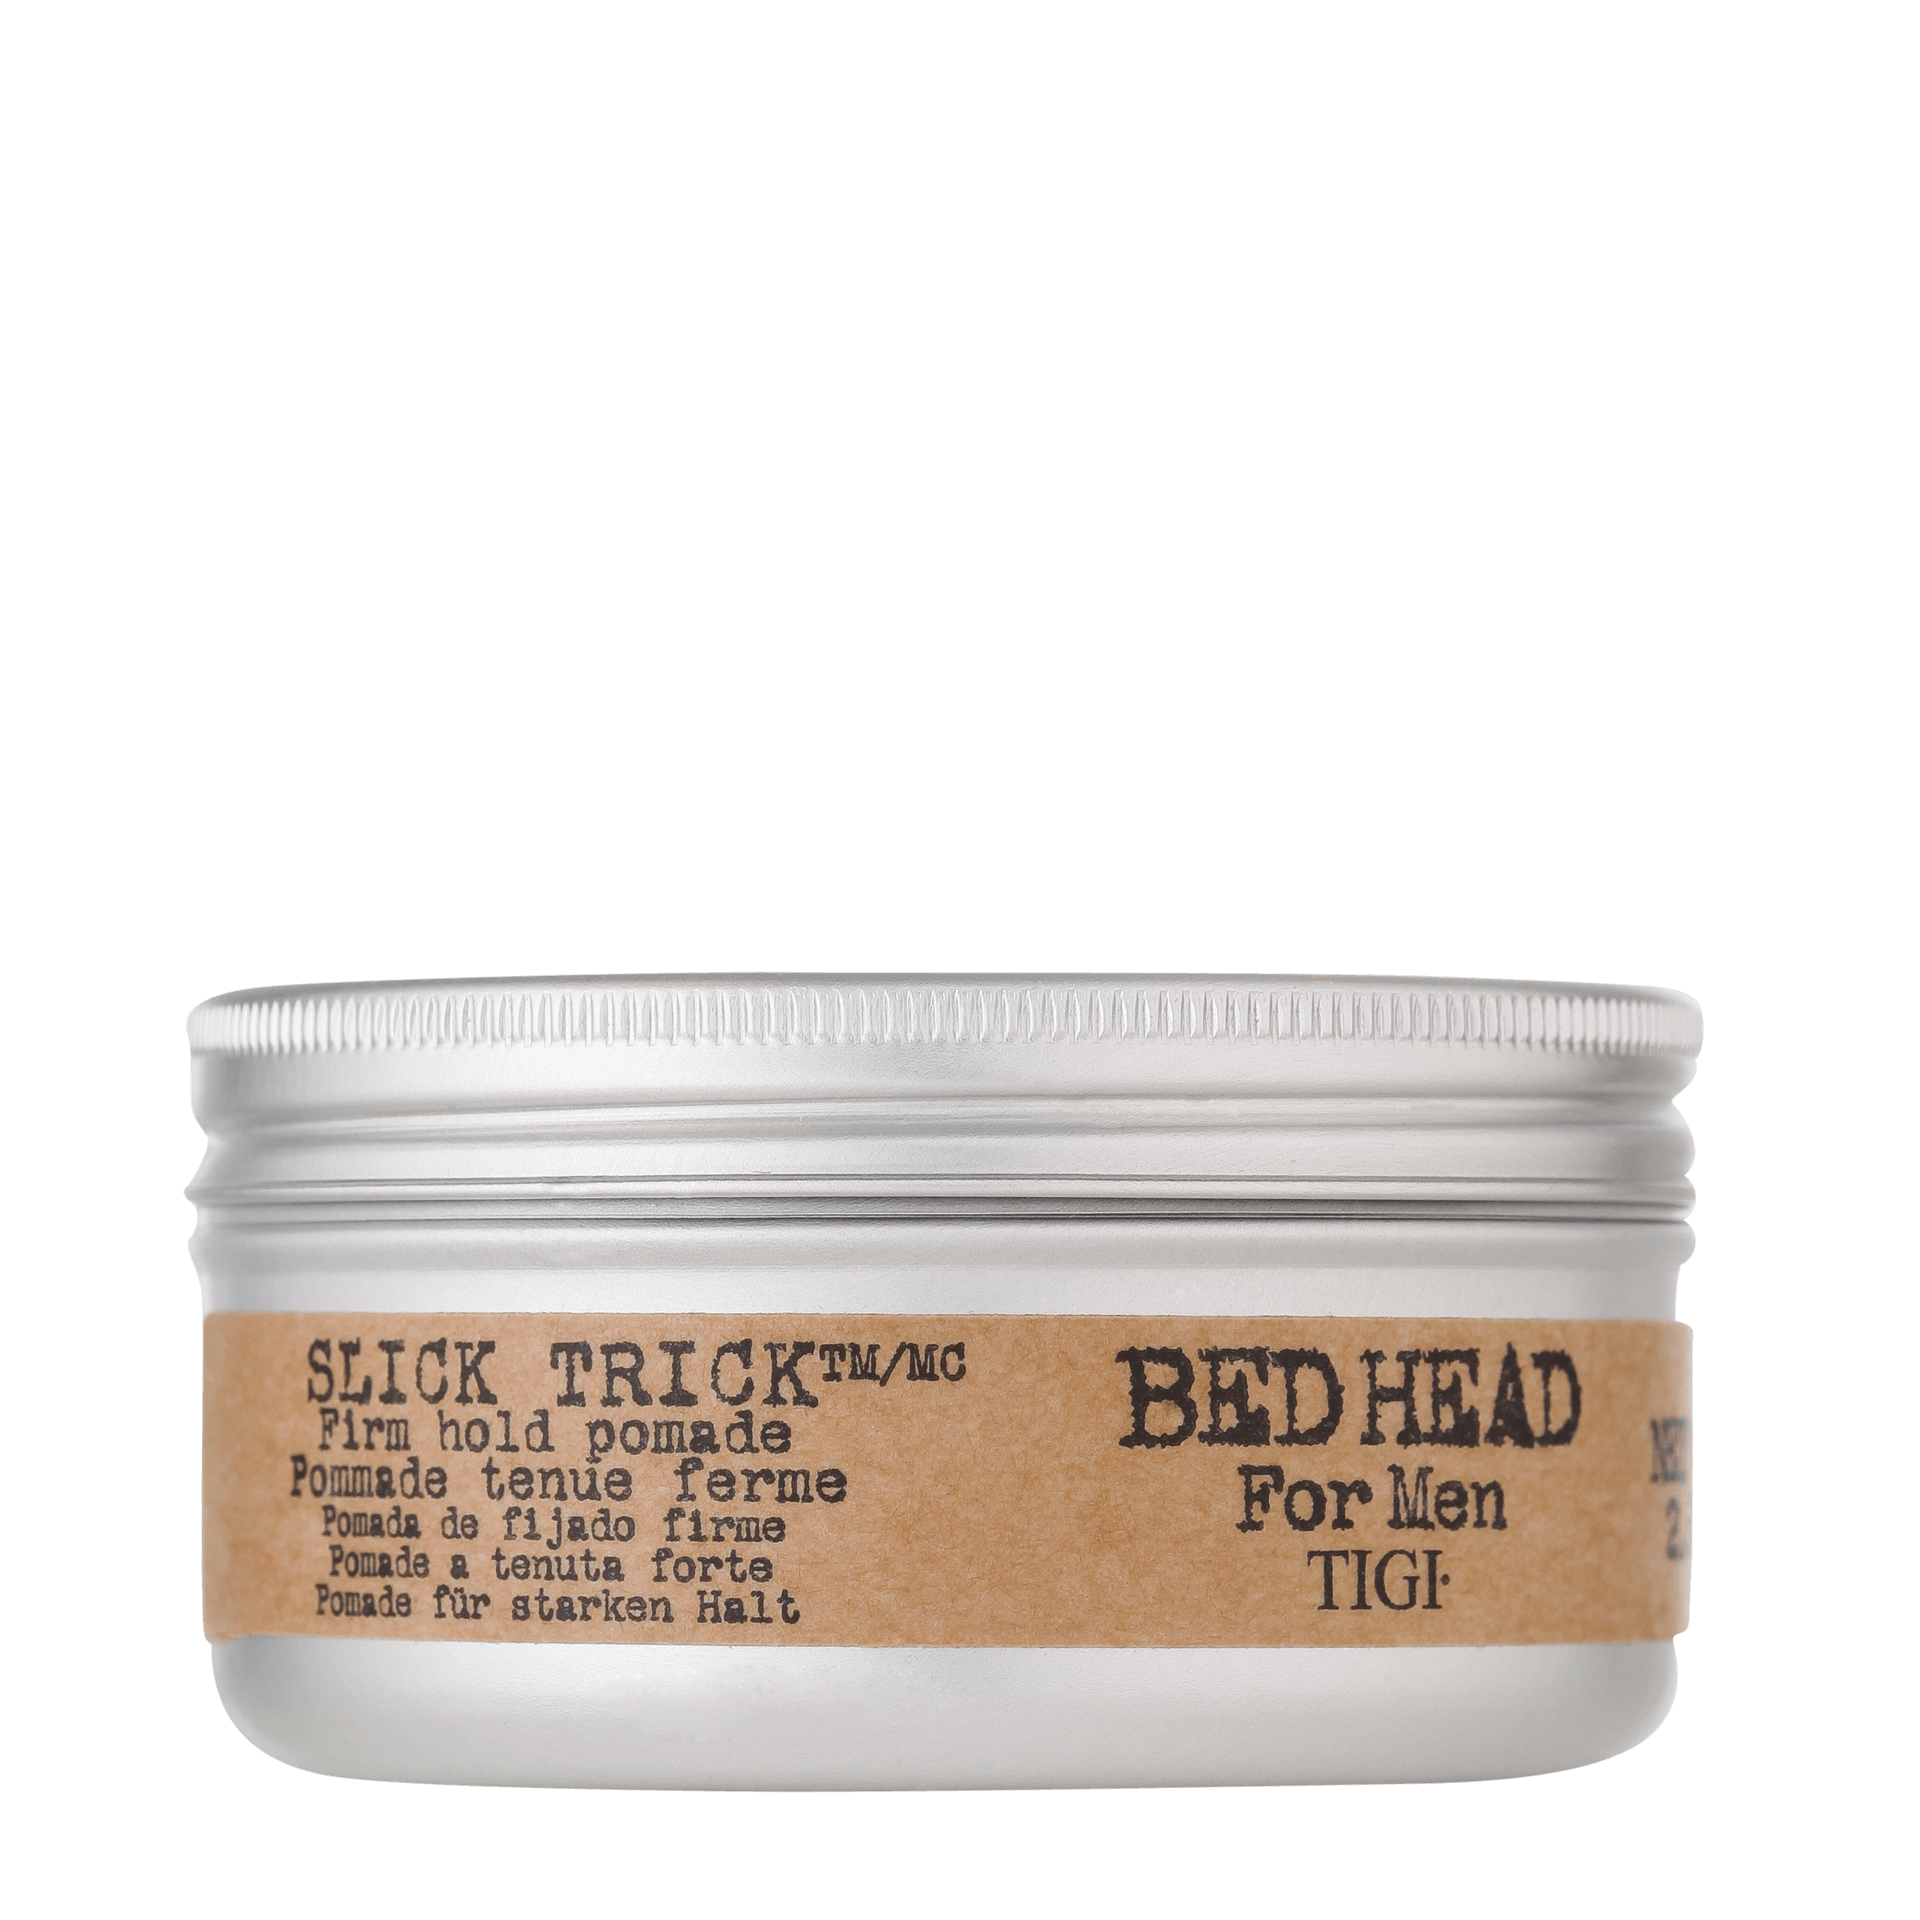 BED HEAD FOR MEN BY TIGI SLICK TRICK FIRM HOLD POMADE front view